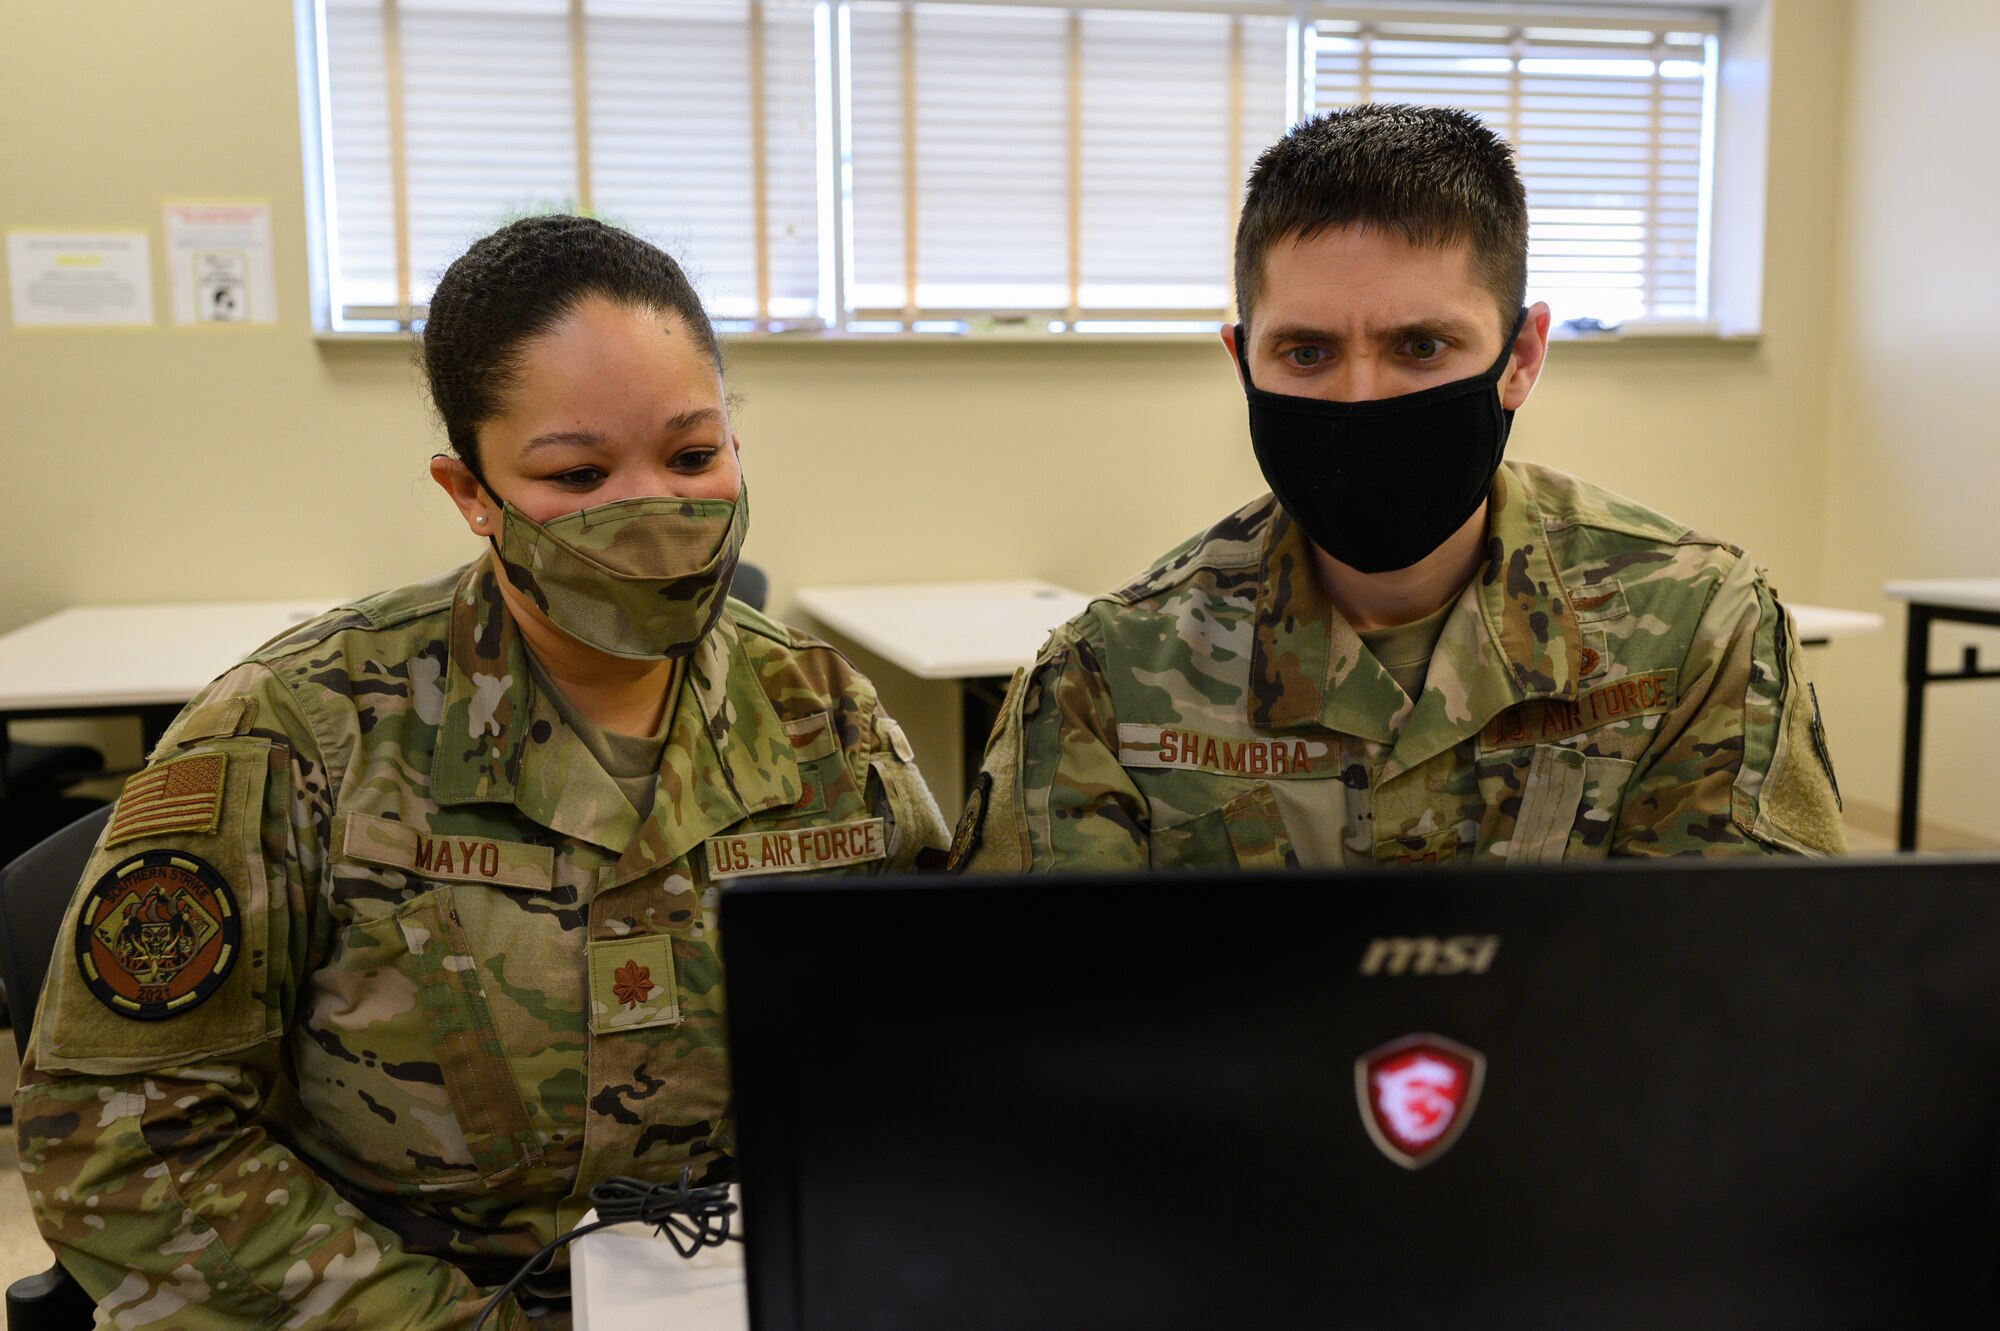 (From left) U.S. Air Force Maj. Christina Mayo, cyber operator for the 175th Cyberspace Operations Squadron, Maryland Air National Guard, and U.S. Air Force Capt. Stephen Shambra, cyber warfare officer for the 275 Cyberspace Operations Squadron, work on a computer April 22, 2021, at the Gulfport Combat Readiness Training Center, Gulfport, Mississippi.